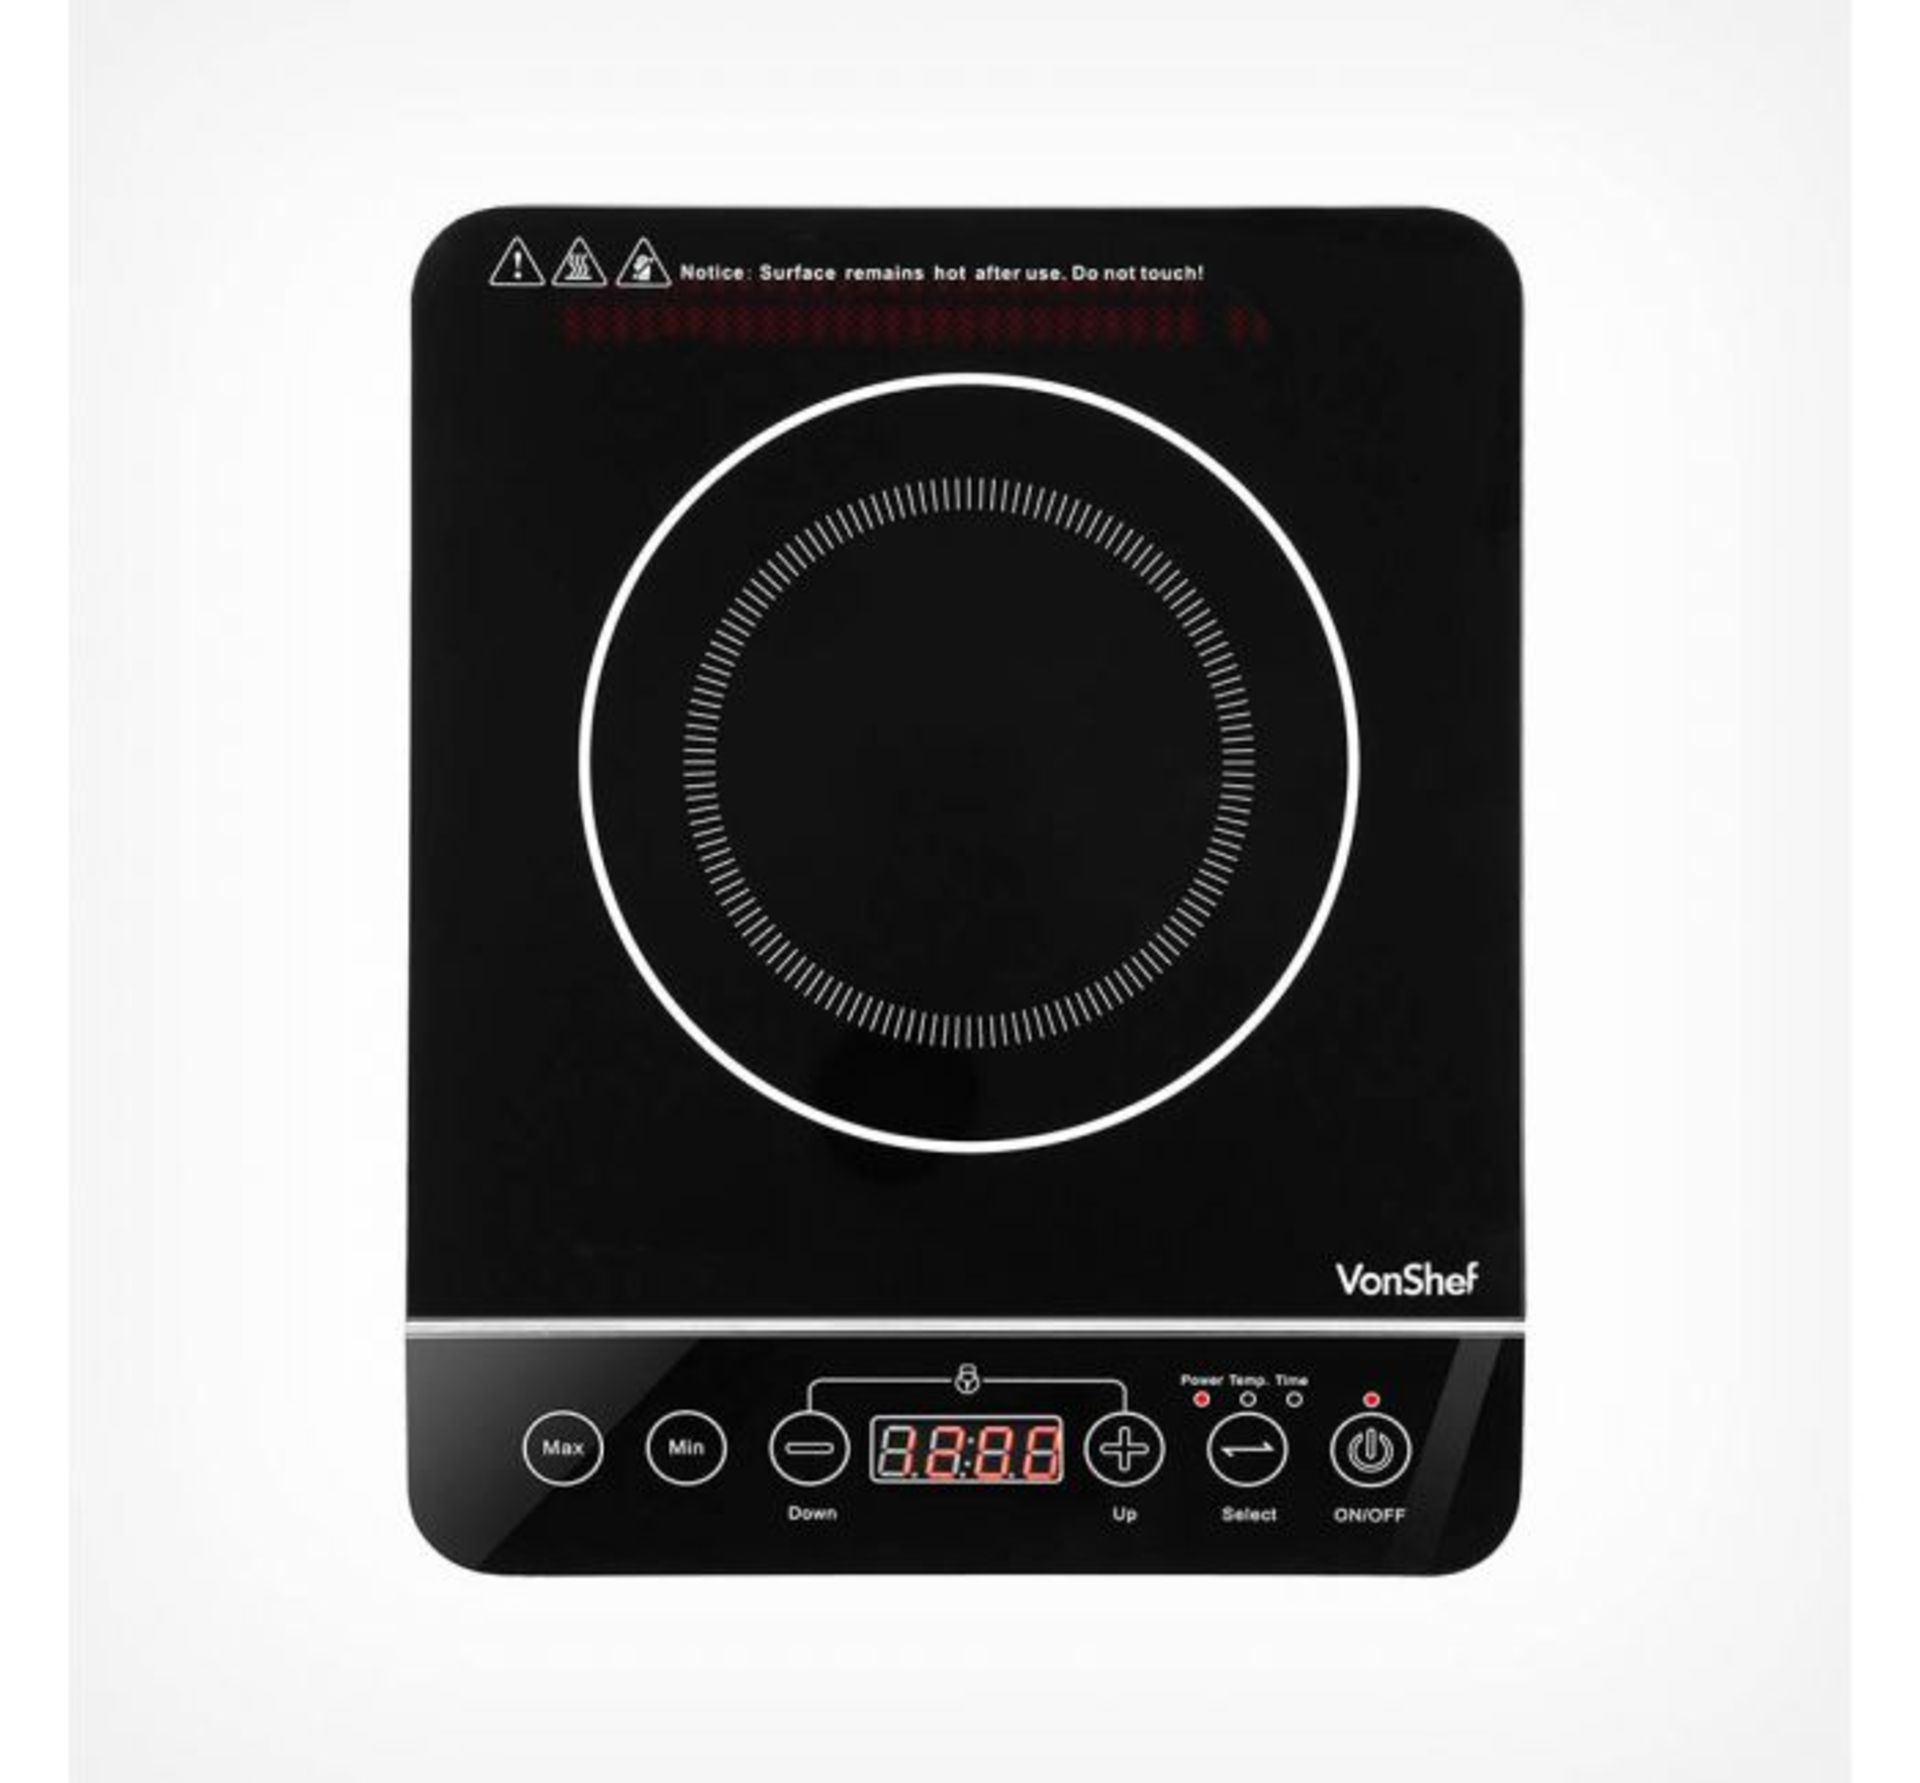 (OM112) Digital Induction Hob Portable and powerful 2000W induction hob - great for small kit... - Image 2 of 2